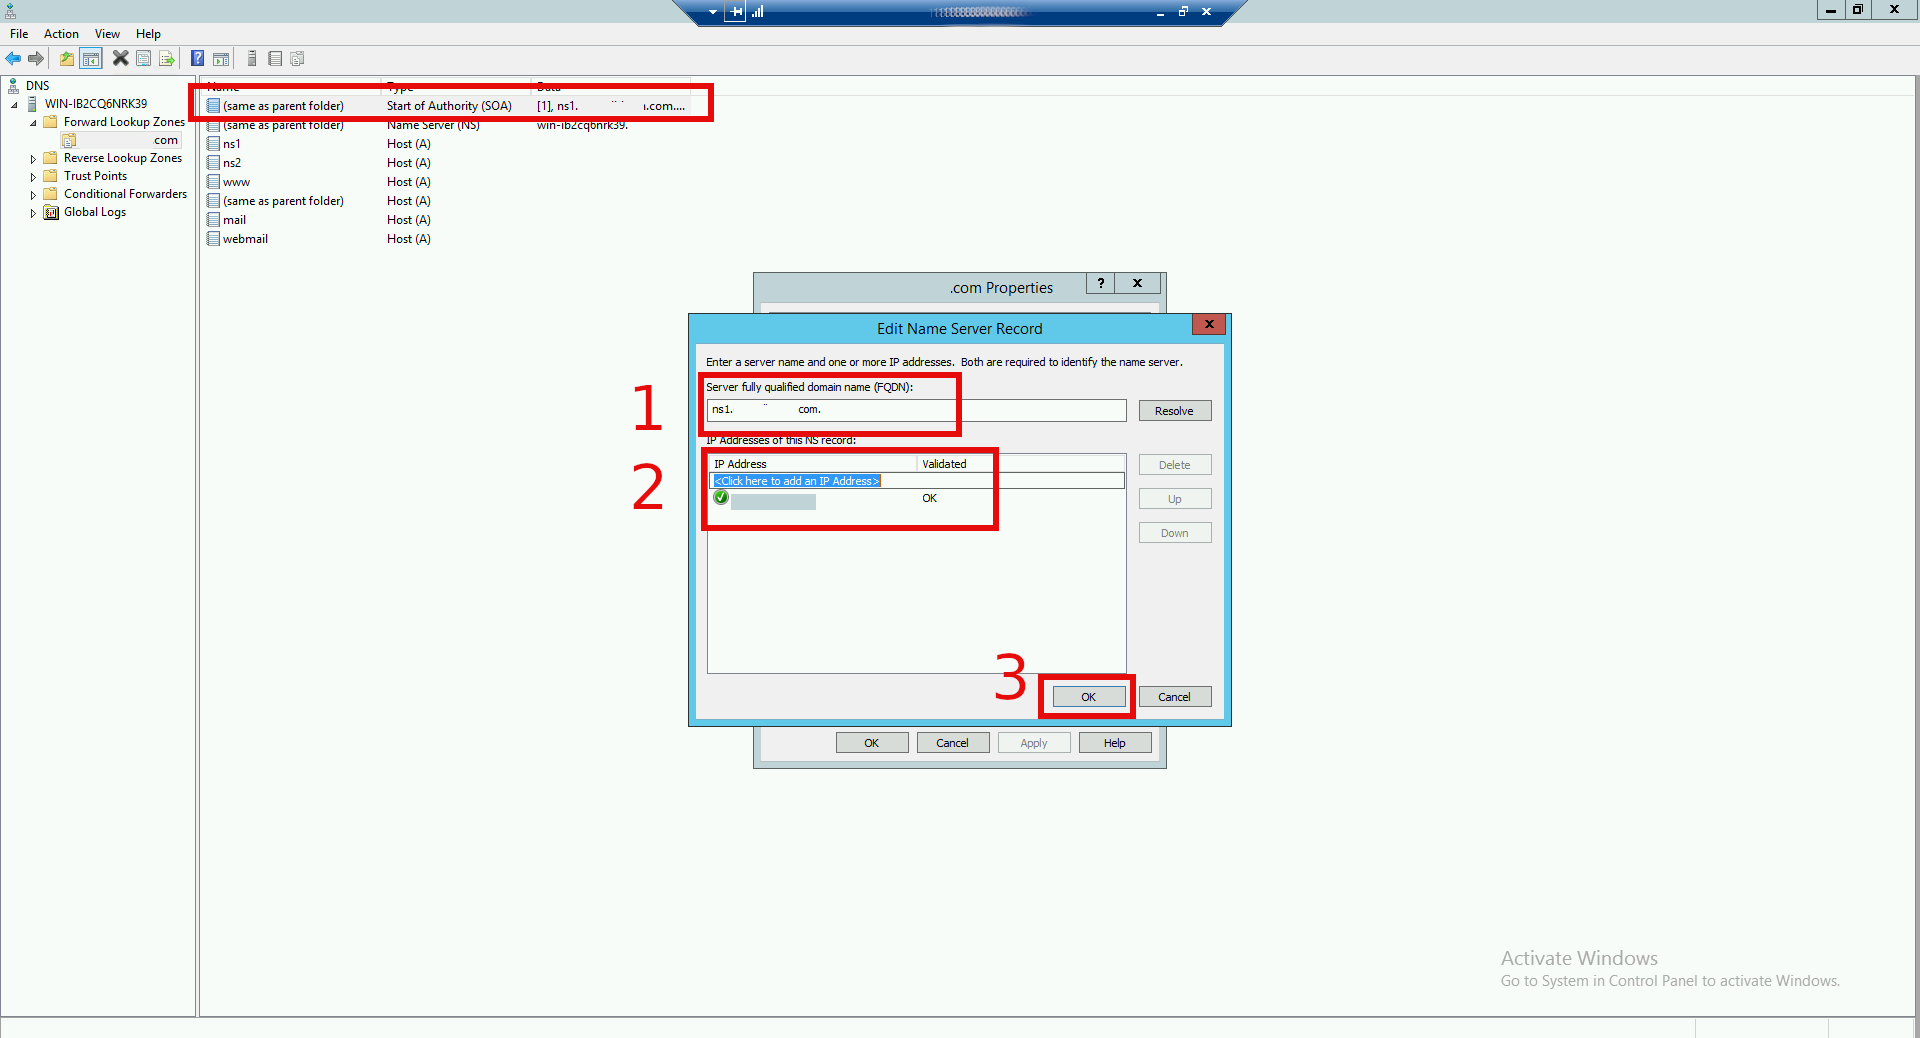 create-soa-3-record-dns-manager-windows-server-2012.png